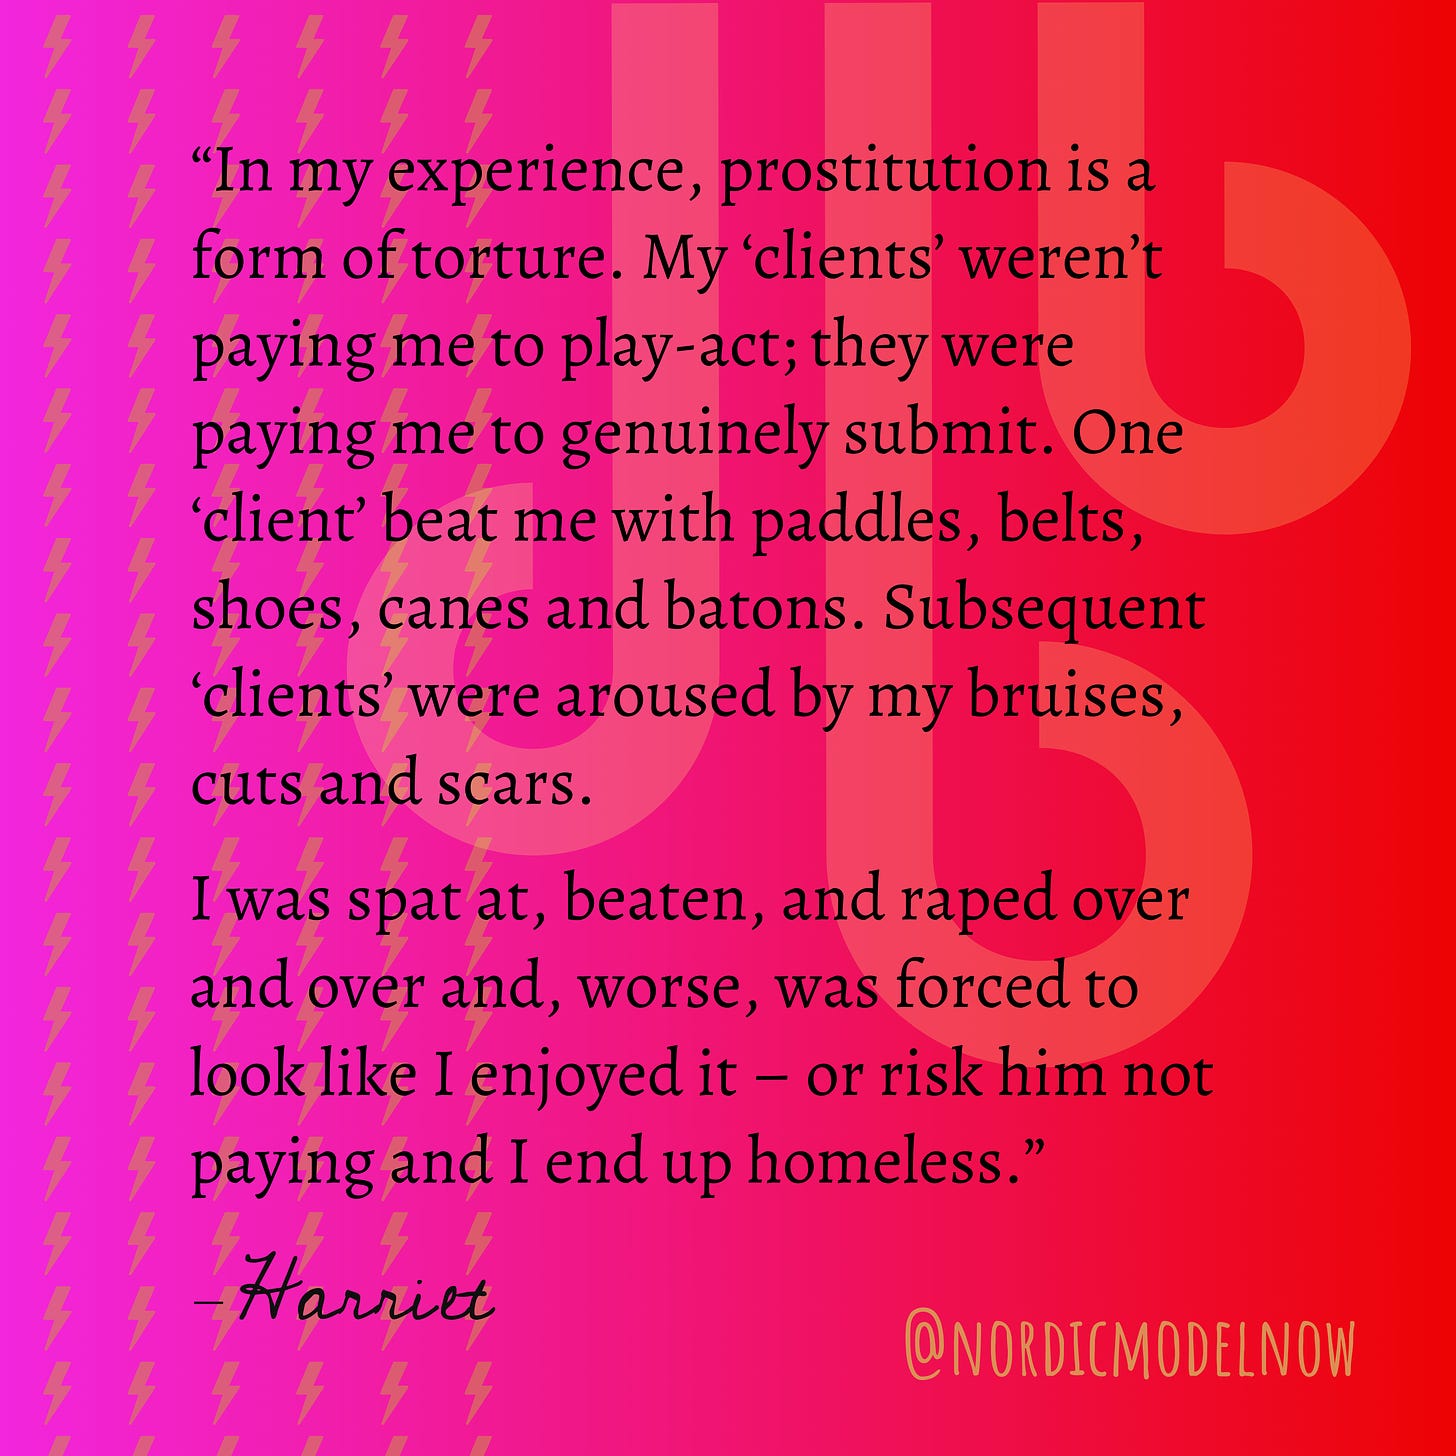 Text that reads: "In my experience, prostitution is a form of torture. My 'clients' weren't paying me to play-act; they were paying me to genuinely submit. One 'client' beat me with paddles, belts, shoes, canes and batons. Subsequent 'clients' were aroused by my bruises, cuts and scars. I was spat at, beaten, and raped over and over and, worse, was forced to look like I enjoyed it - or risk him not paying and I end up homeless." - Harriet @ Nordicmodelnow